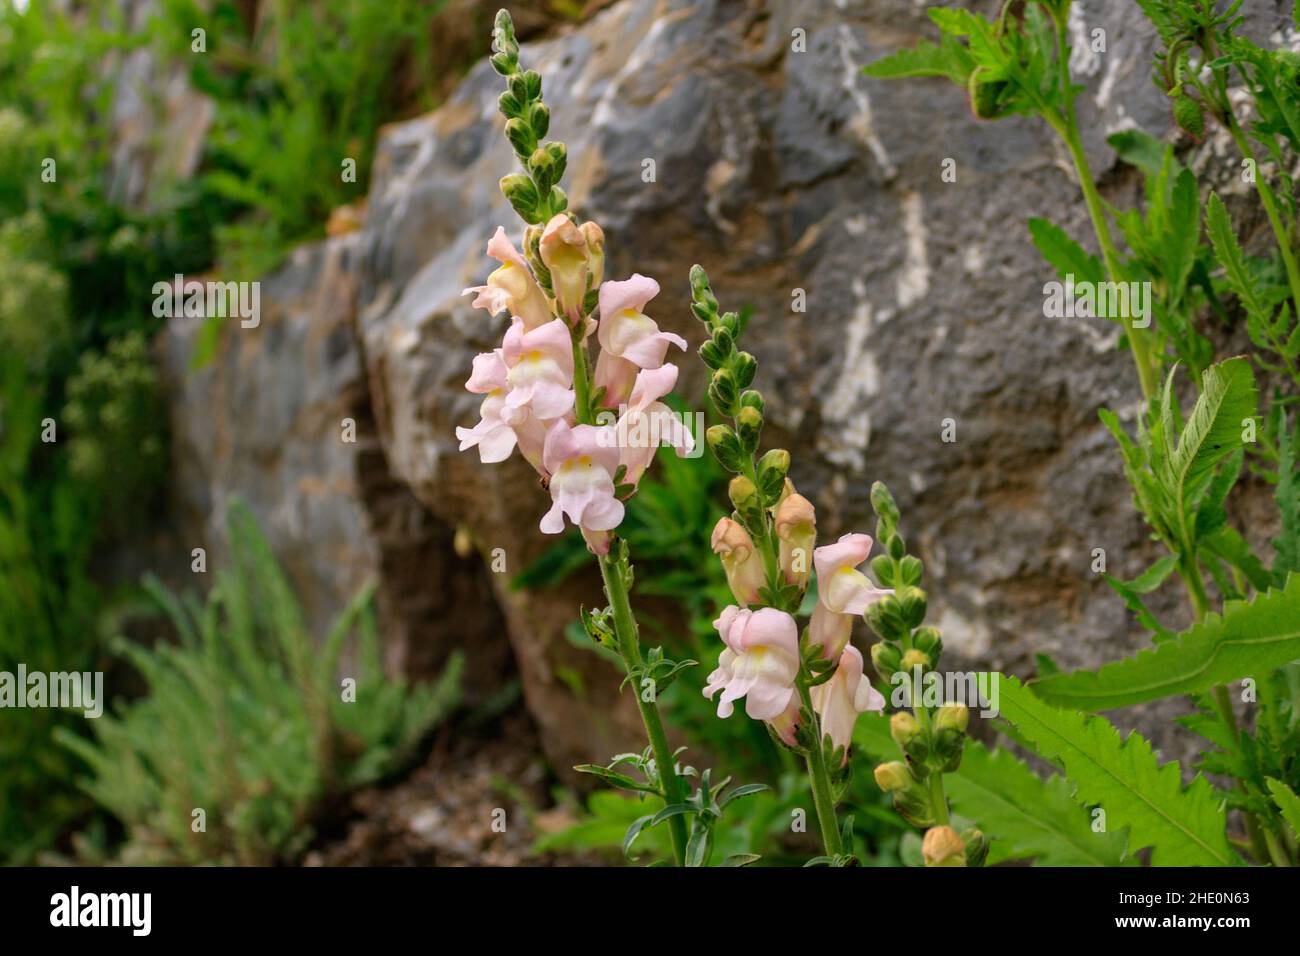 Close up of dragon flowers (Antirrhinum majus) or snapdragons in rocky area Stock Photo